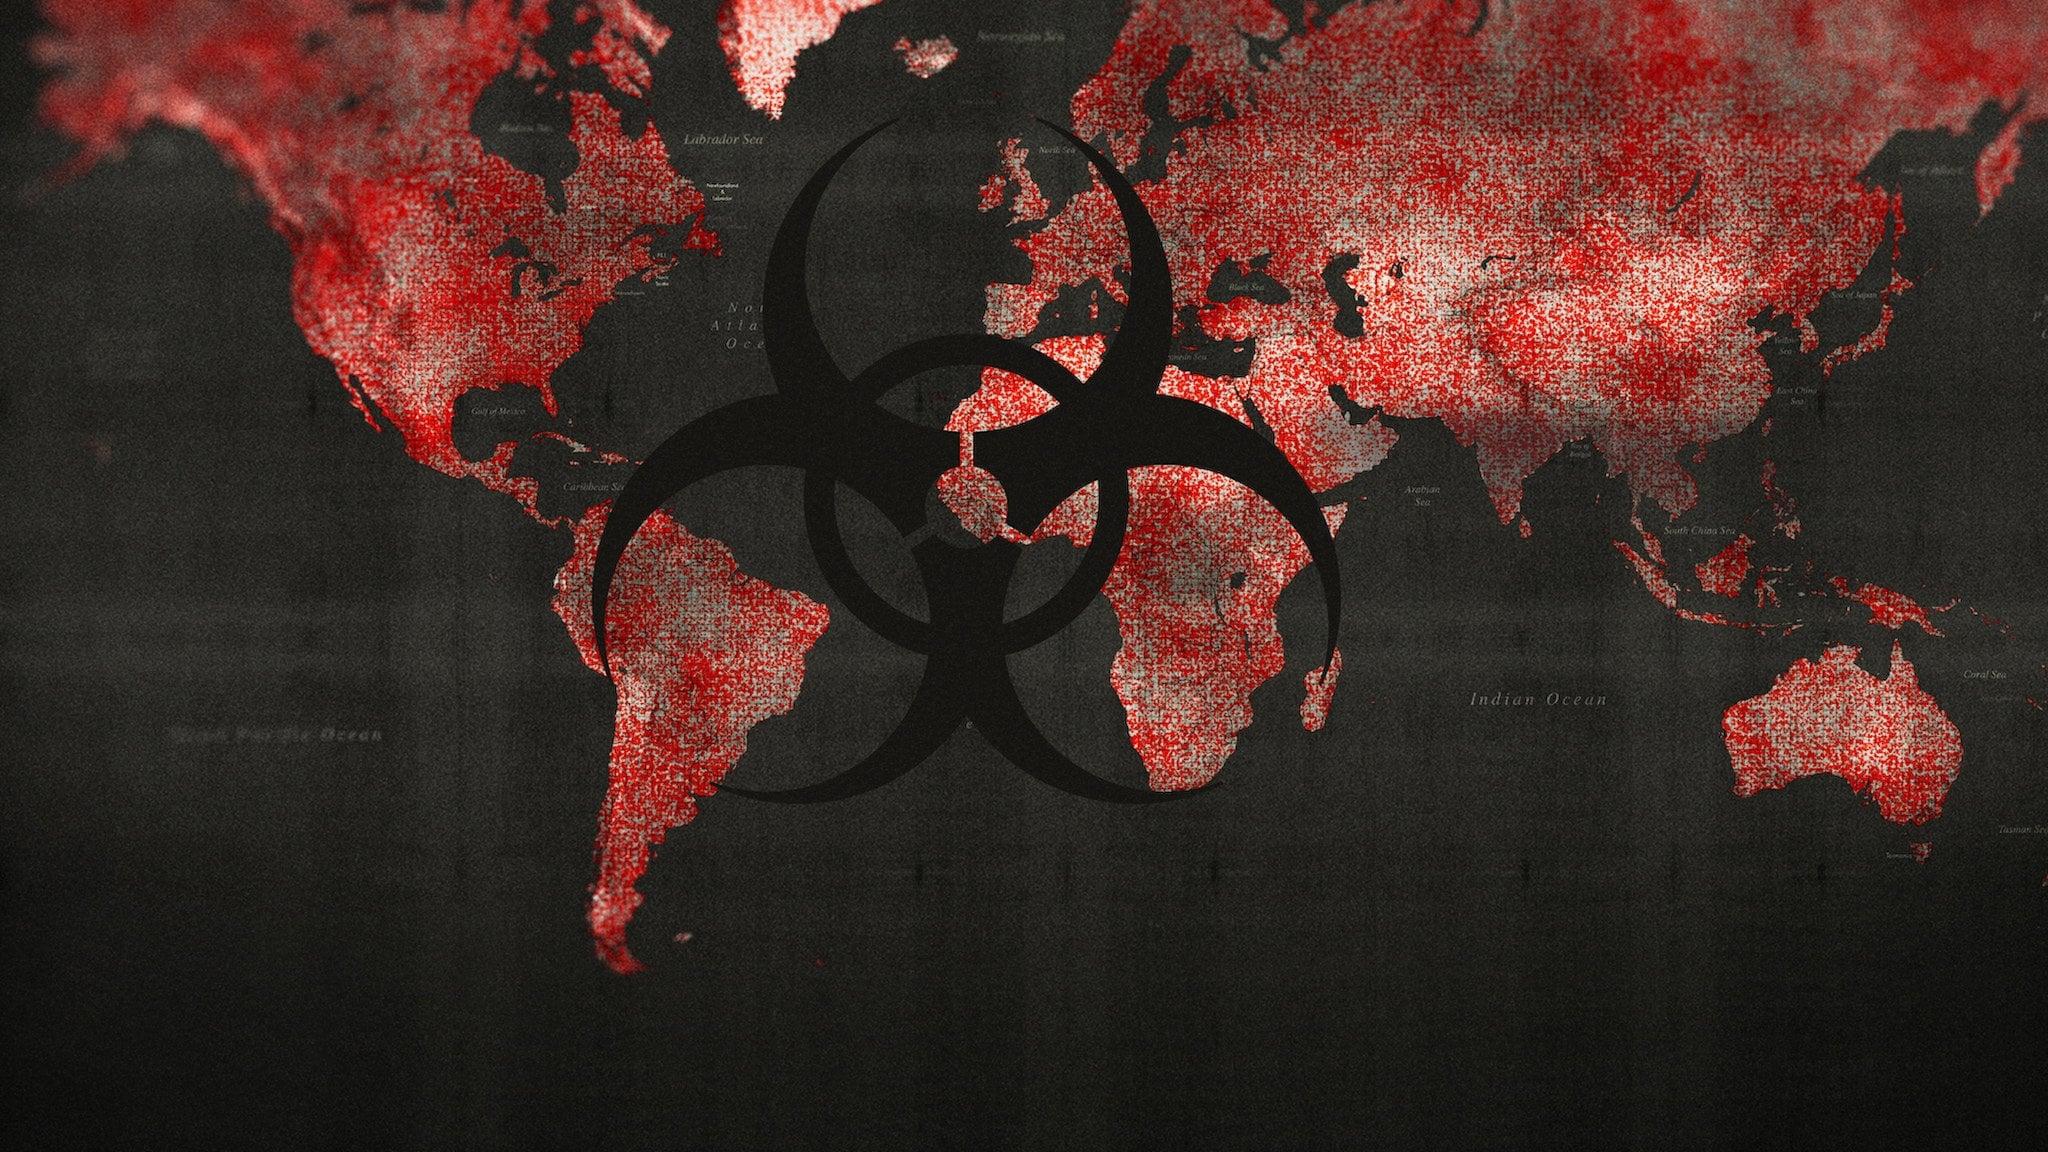 Pandemic: How to Prevent an Outbreak backdrop